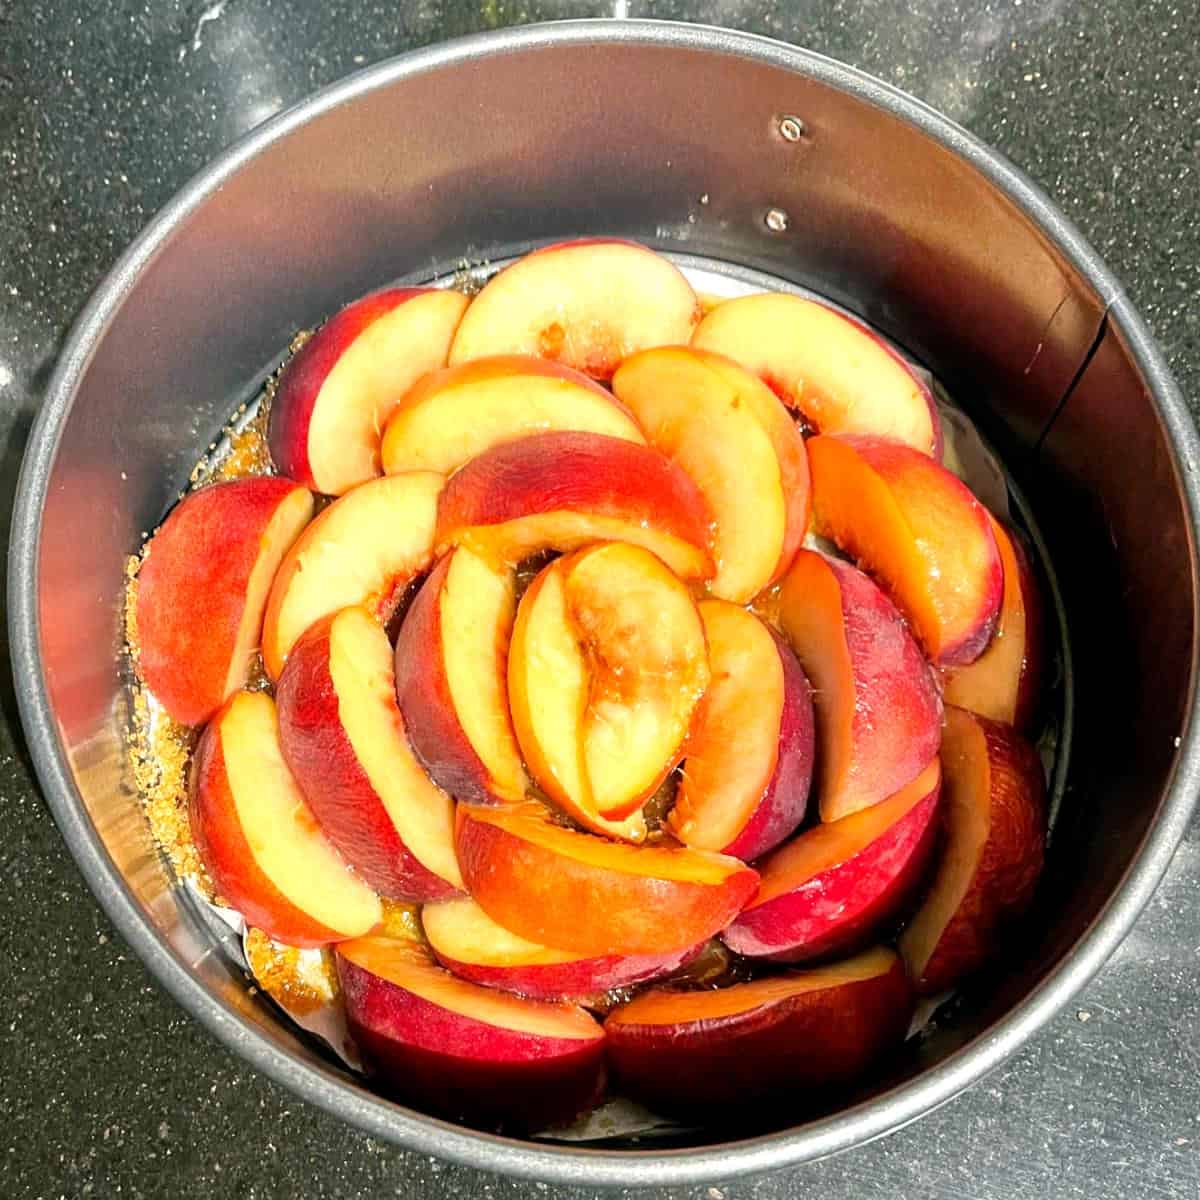 Peaches arranged in cake pan for upside-down peach cake.